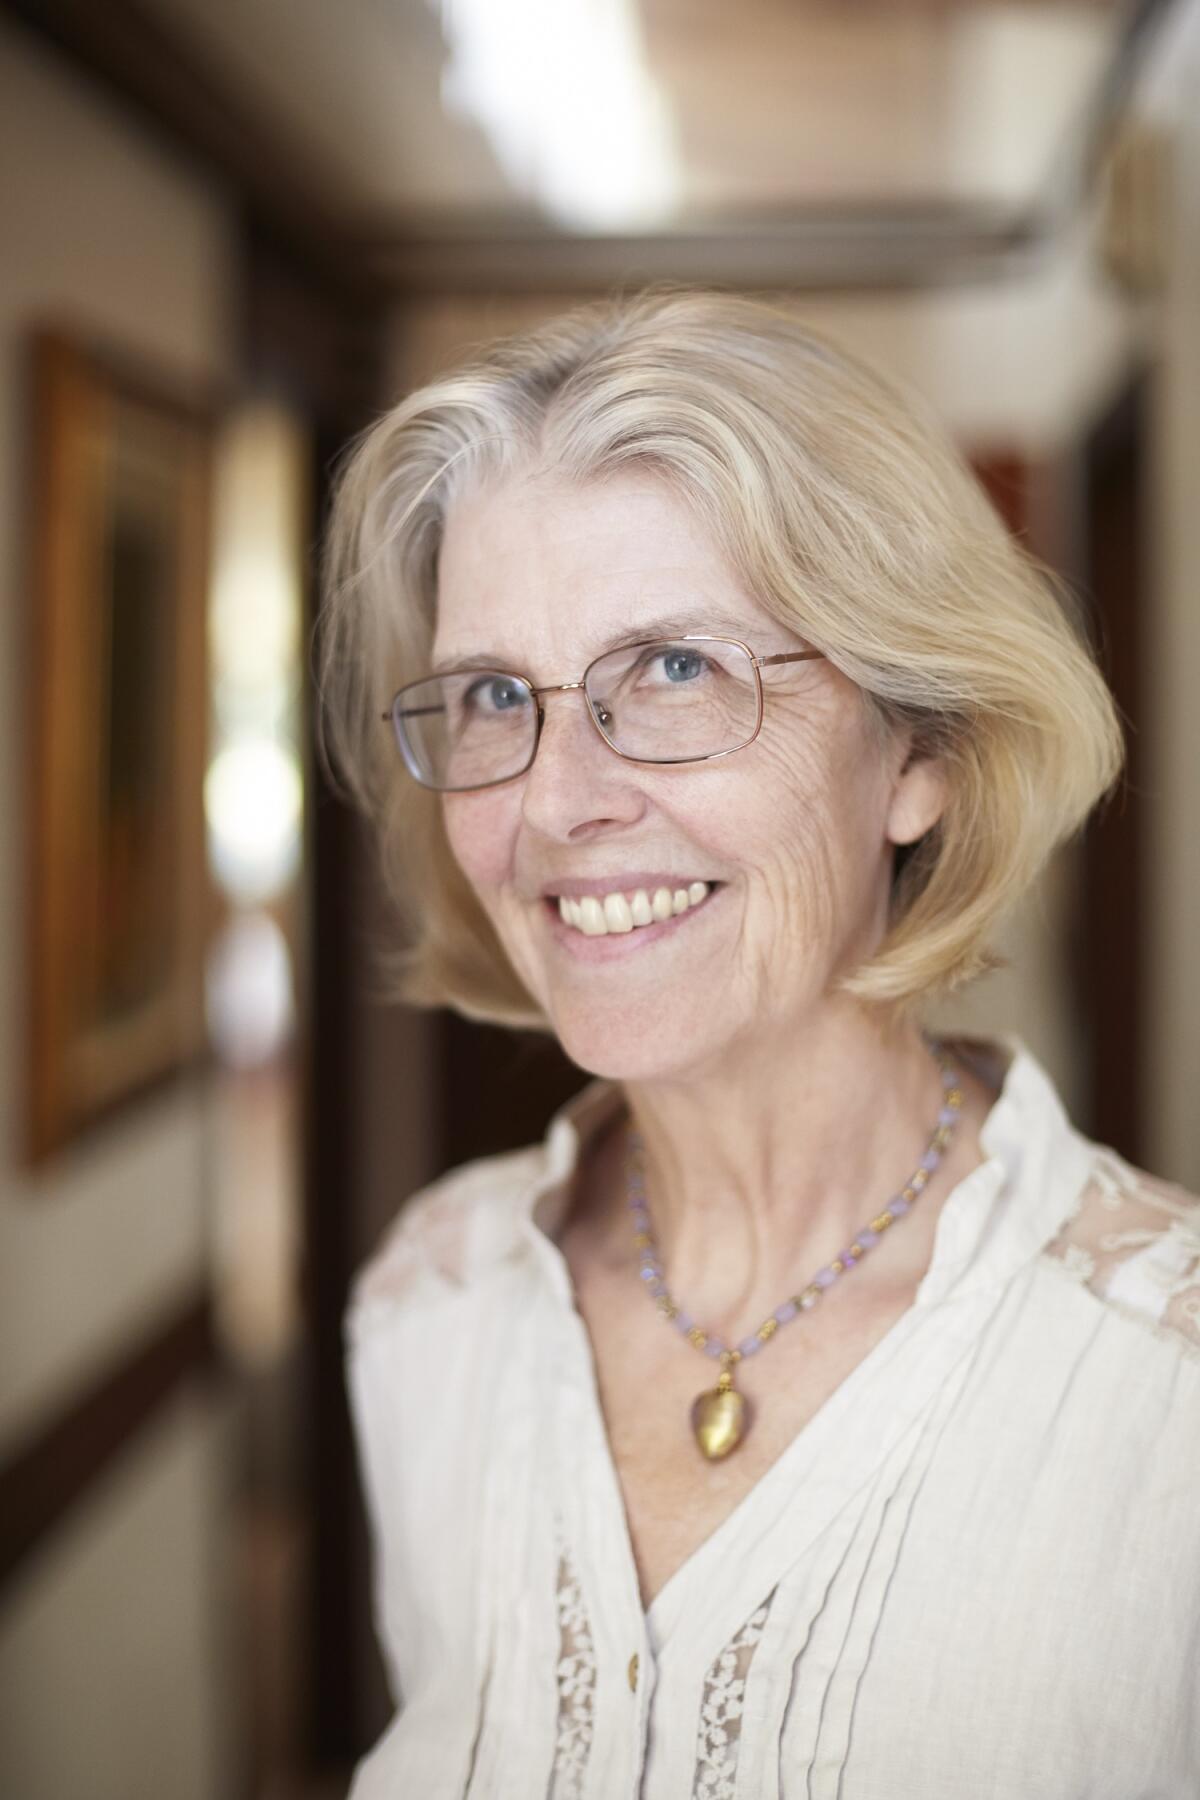 Jane Smiley's latest novel, 'A Dangerous Business,' tracks a brothel worker on the case in 19th century Monterey, Calif.